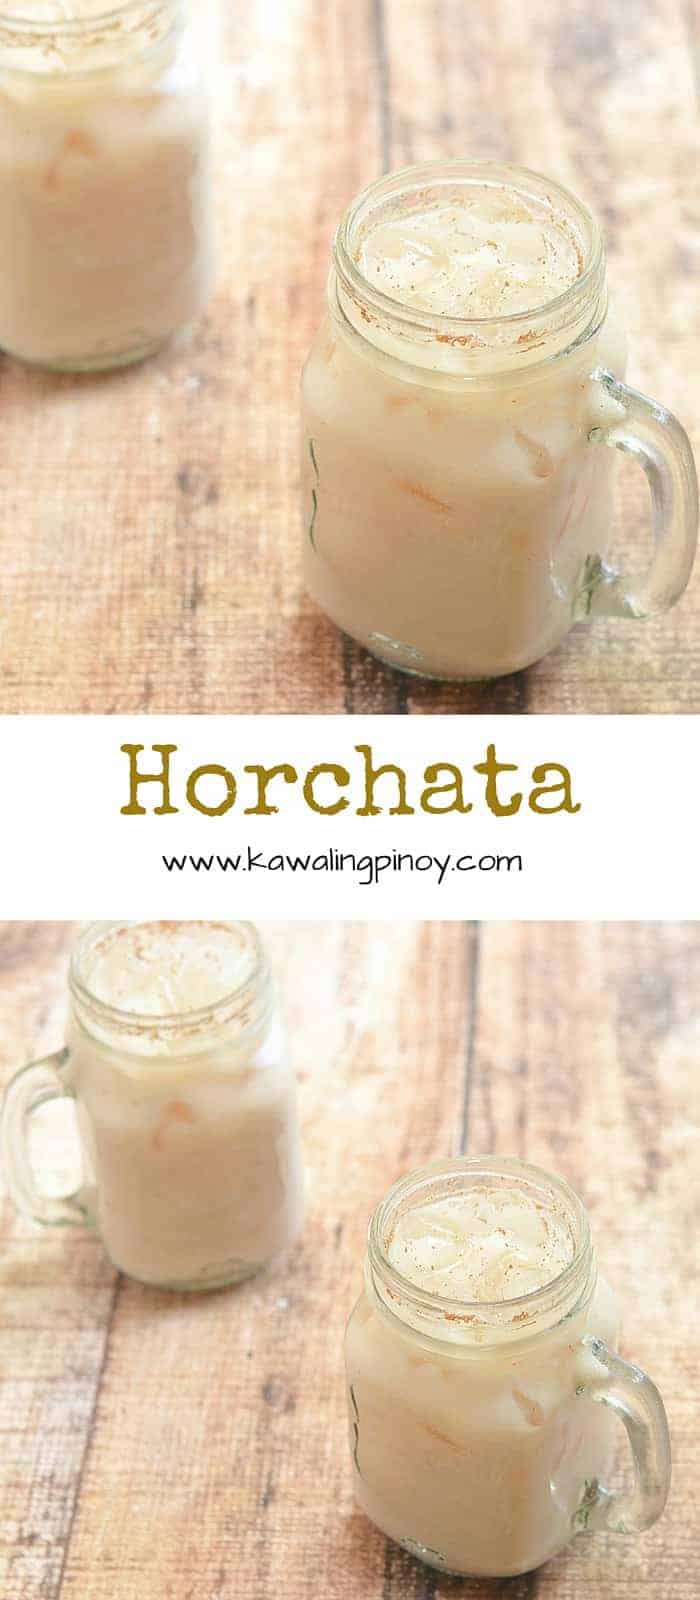 Made with ground rice, sweetened milk and cinnamon, Horchata is a type of Mexican agua fresca that's refreshing as it is delicious.